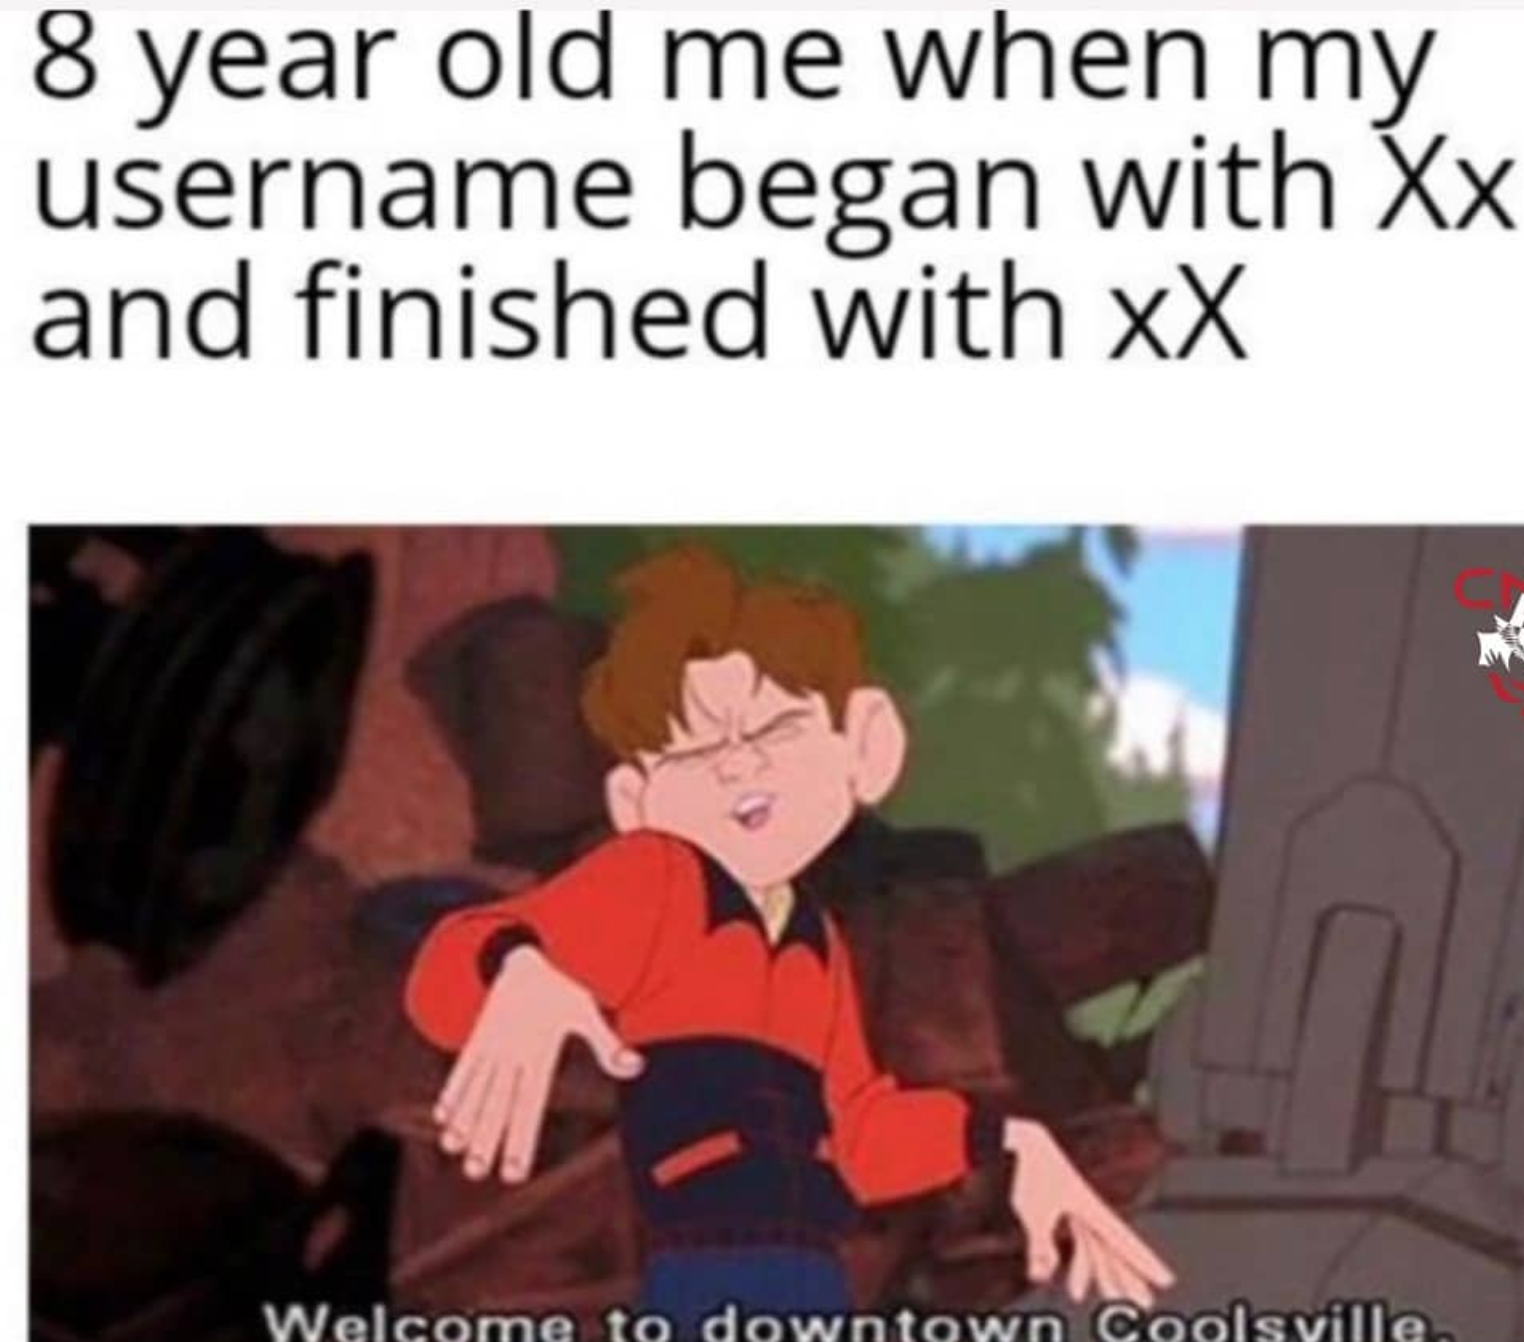 gaming memes and pics - atla memes - 8 year old me when my username began with Xx and finished with Xx Welcome to downtown Coolsville